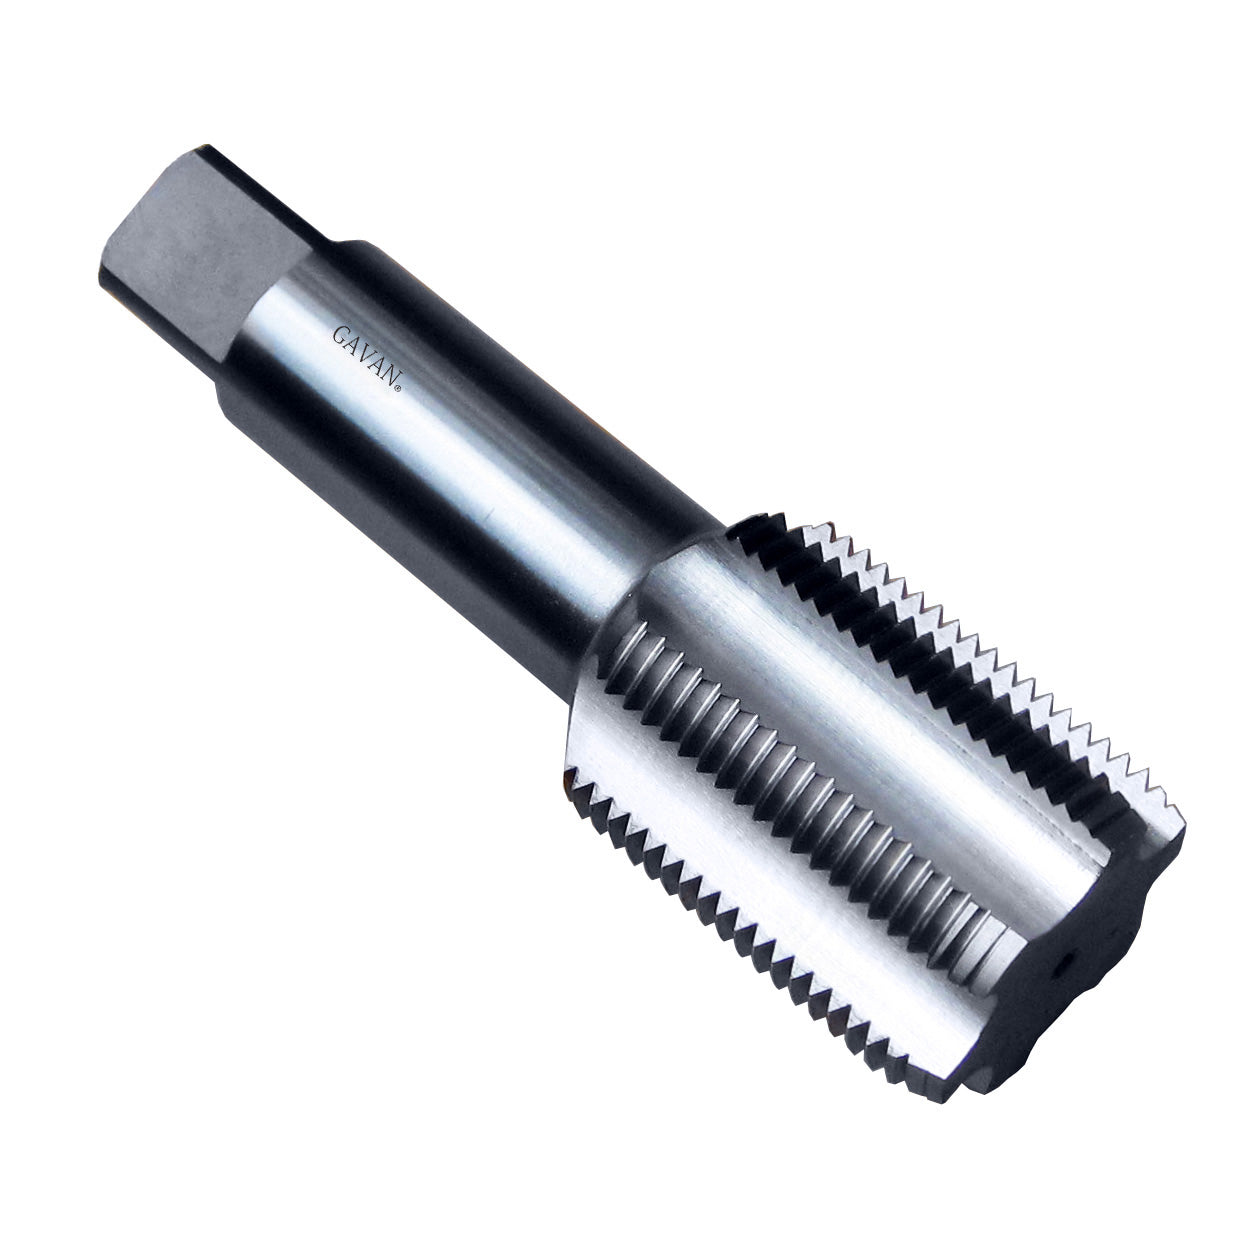 1 7/8" - 8 HSS Unified Right Hand Thread Tap